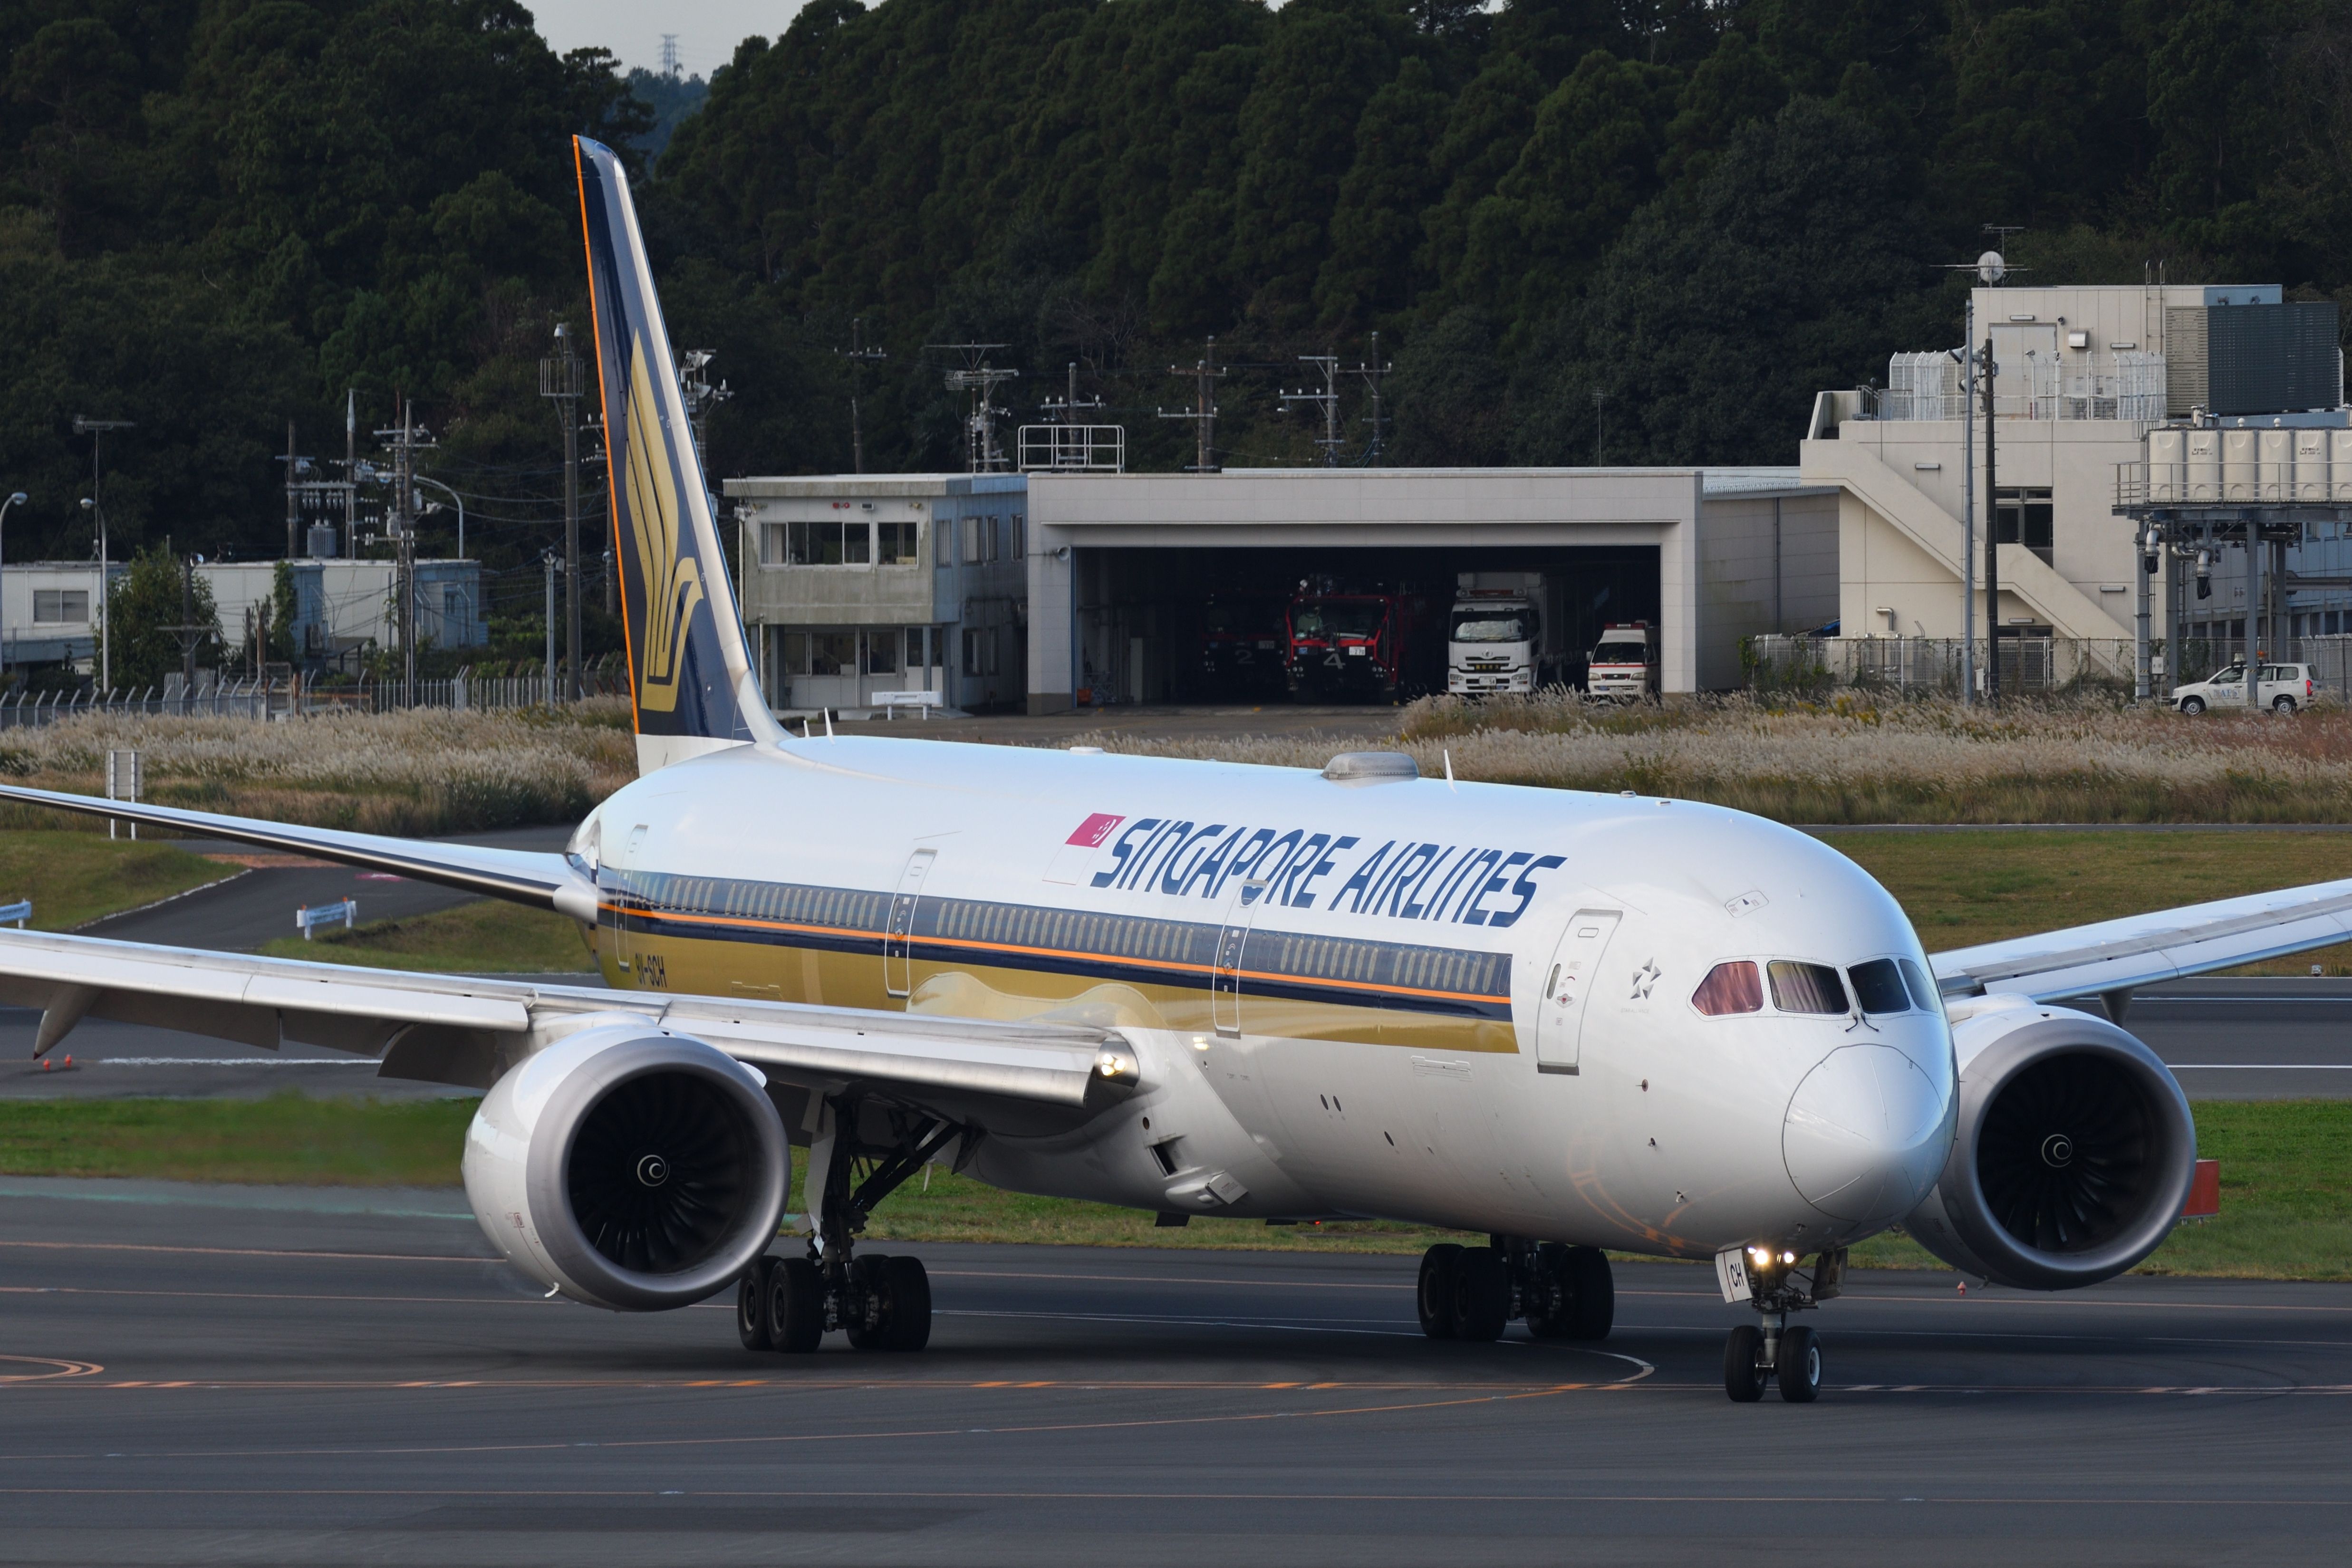 A Singapore Airlines Boeing 787-10 on an airport apron.